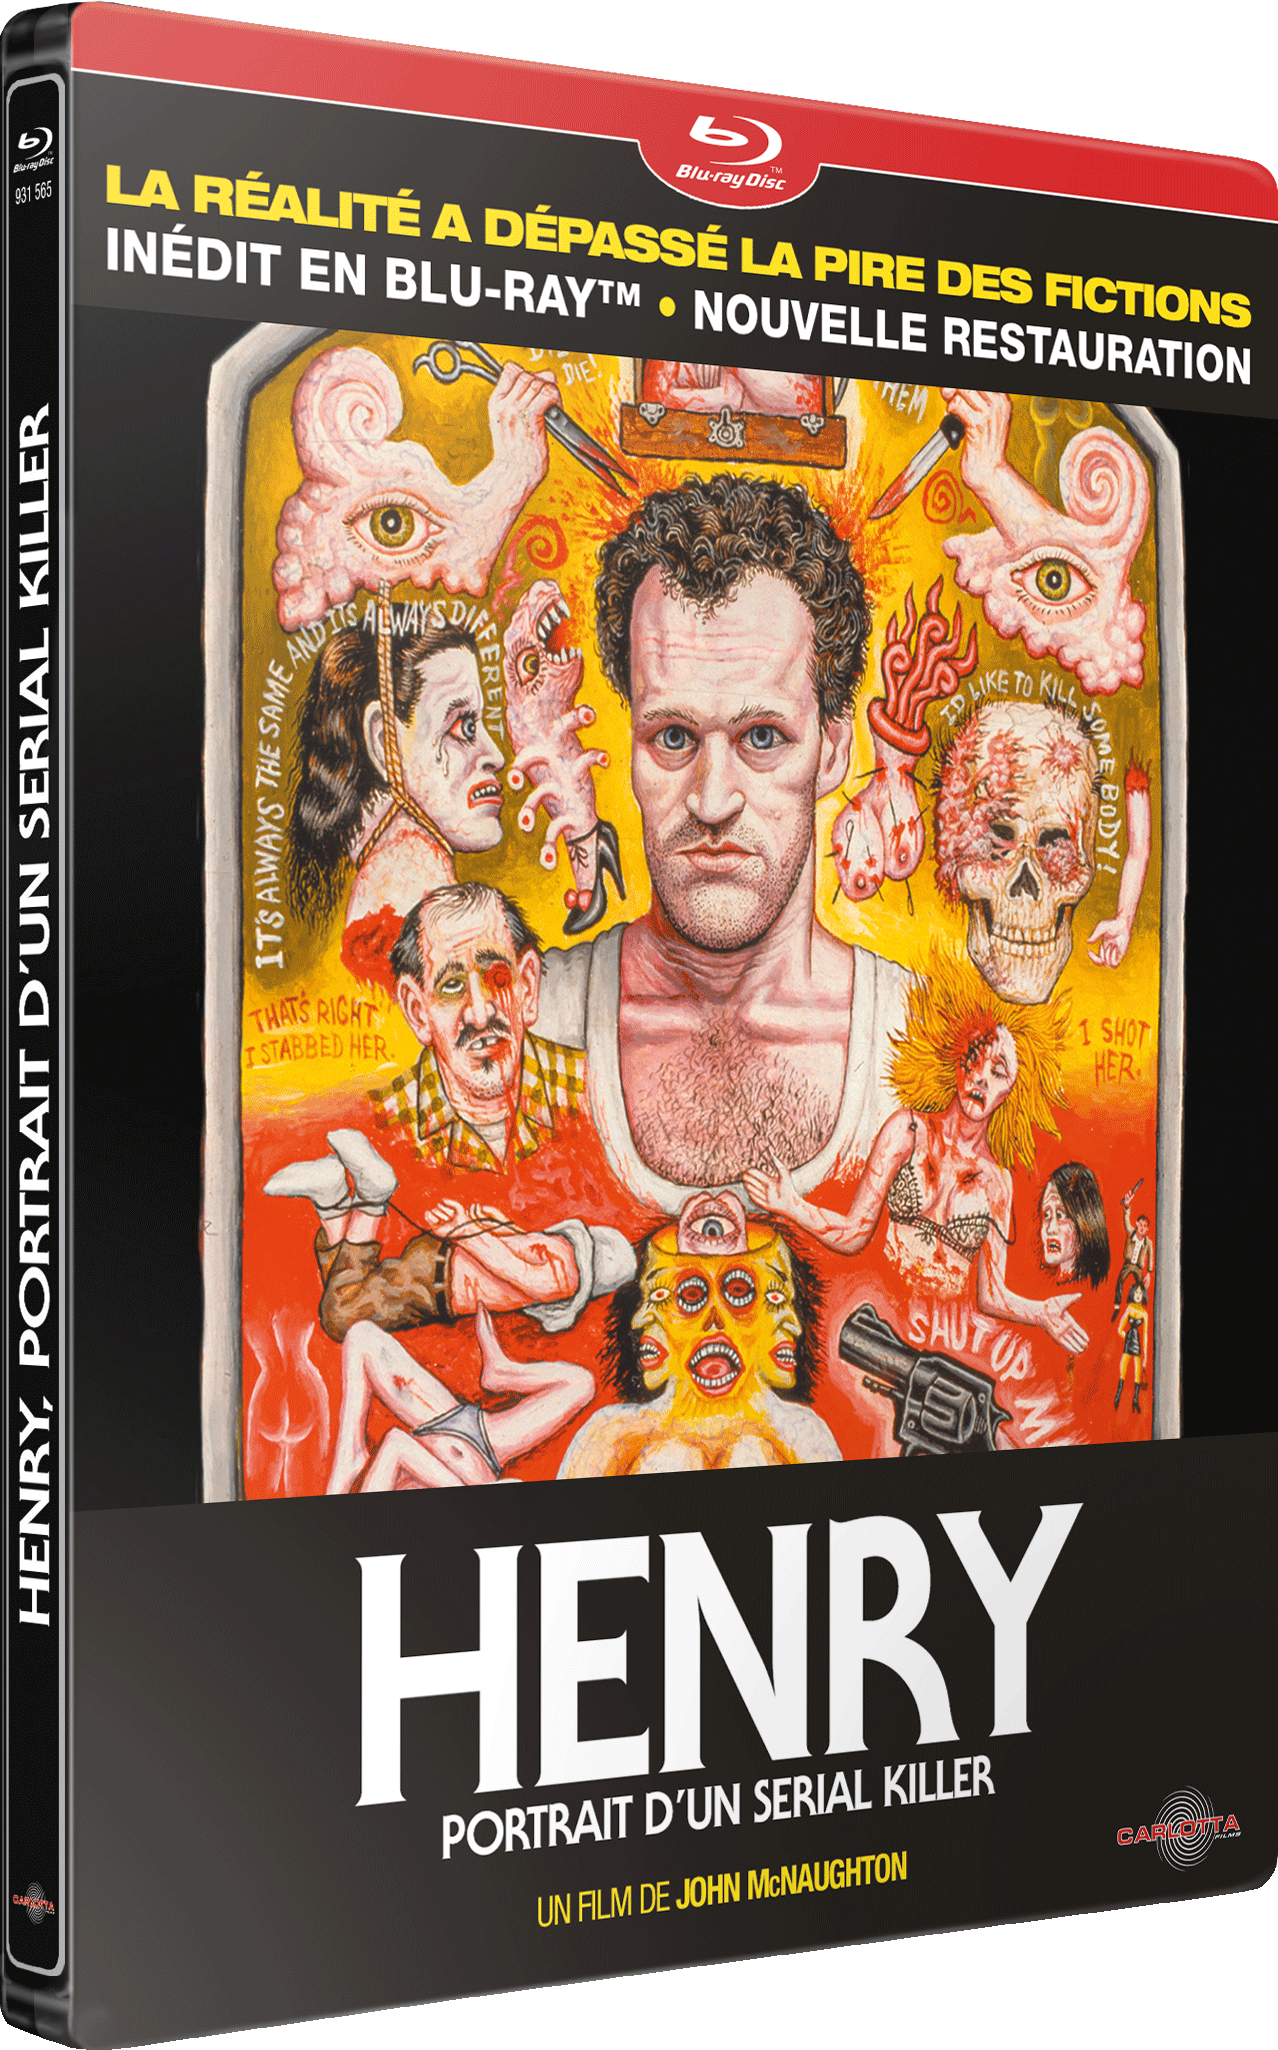 Pack Henry La Totale - Blu-ray + Poster + T-Shirt